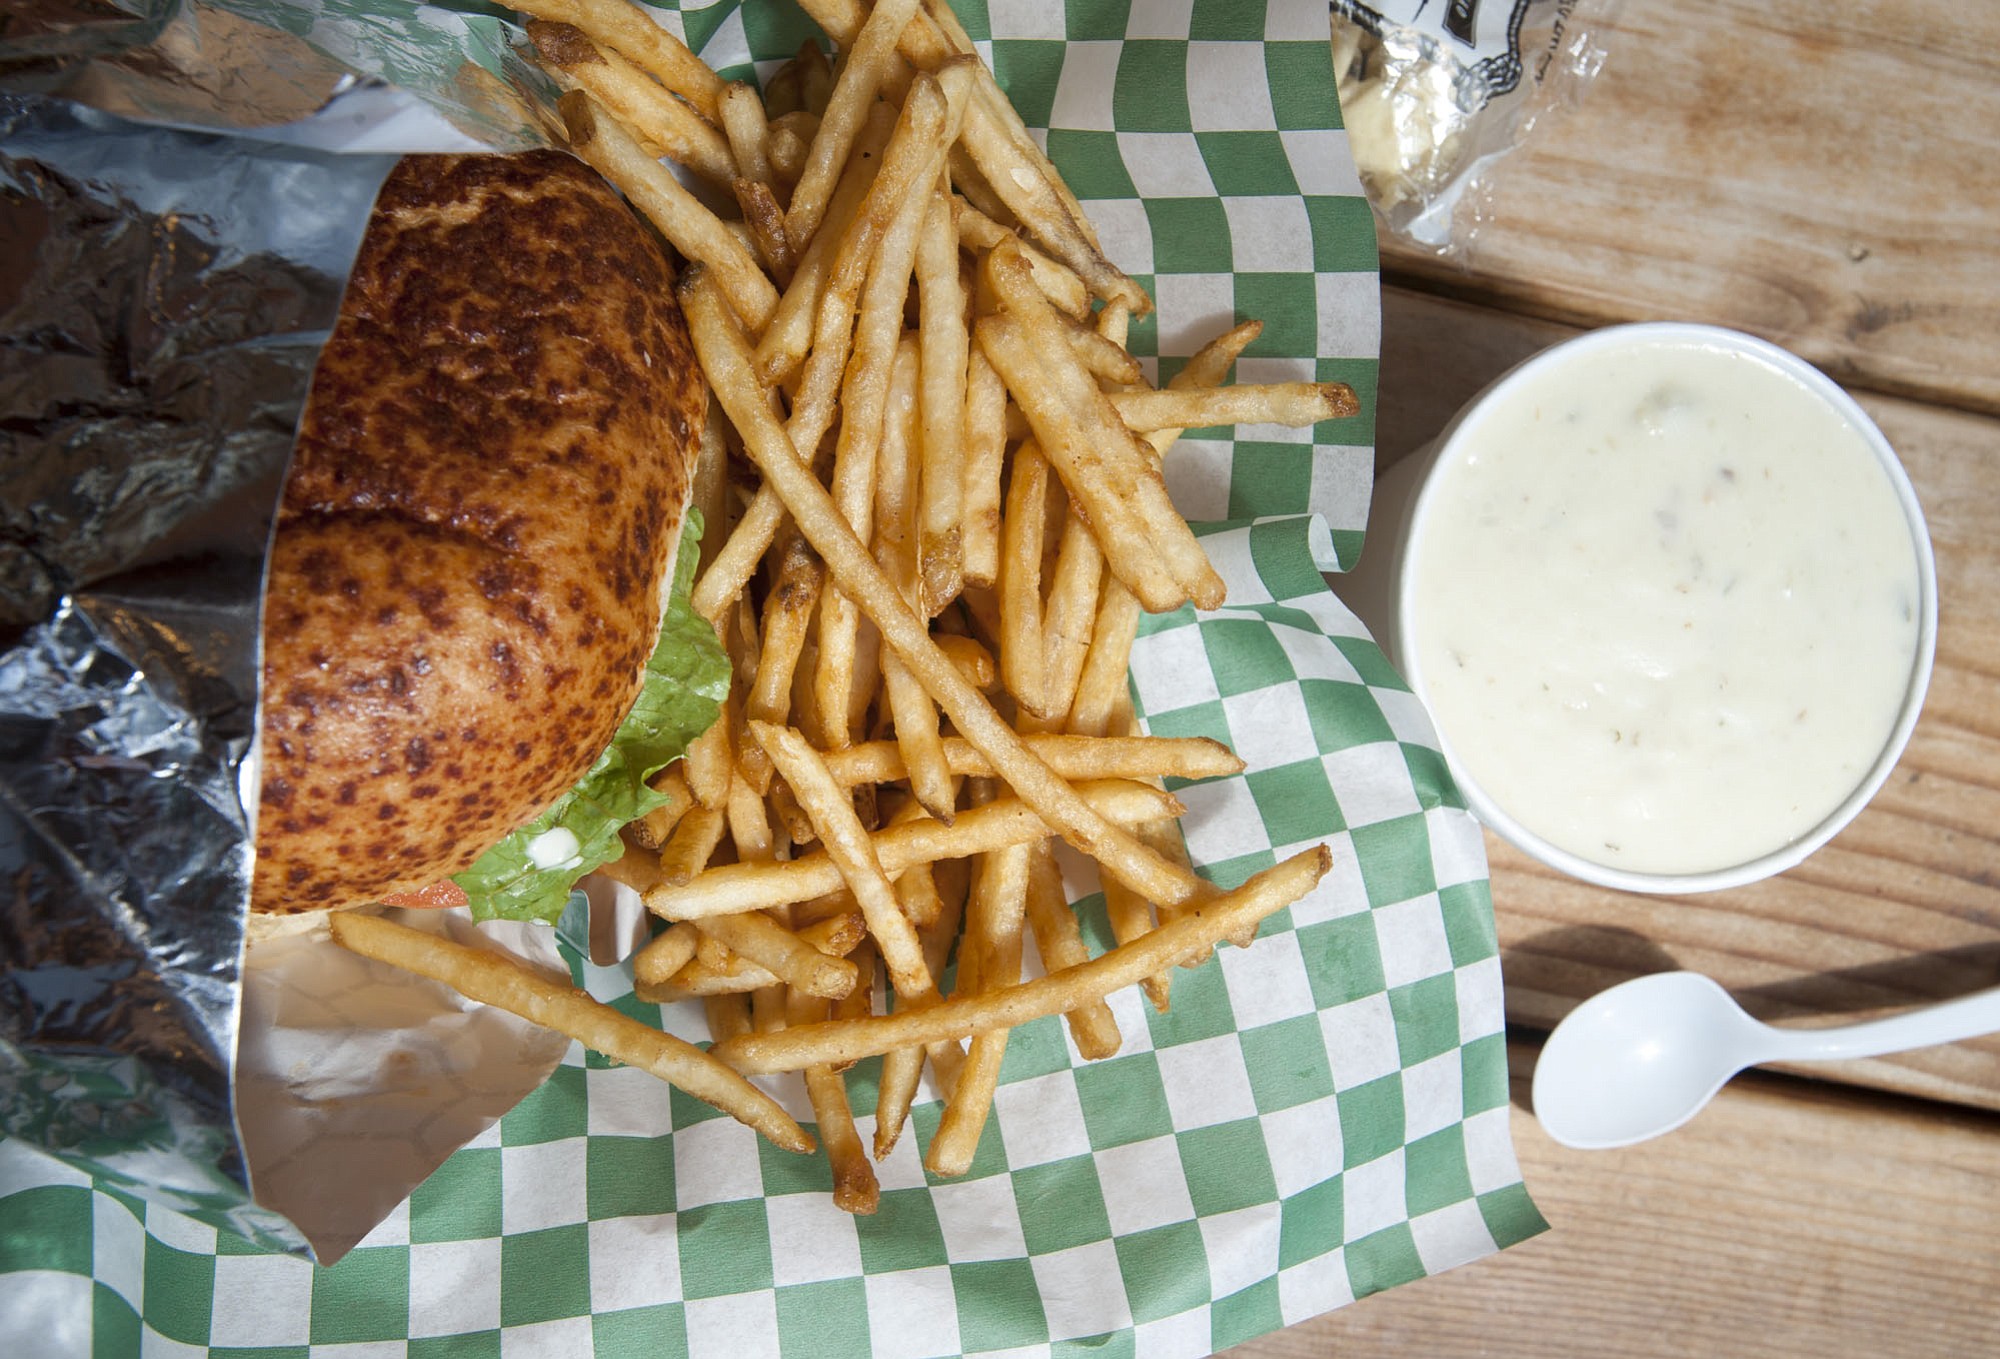 A halibut sandwich and clam chowder are served at Pacific Northwest Best Fish Co. in Ridgefield.